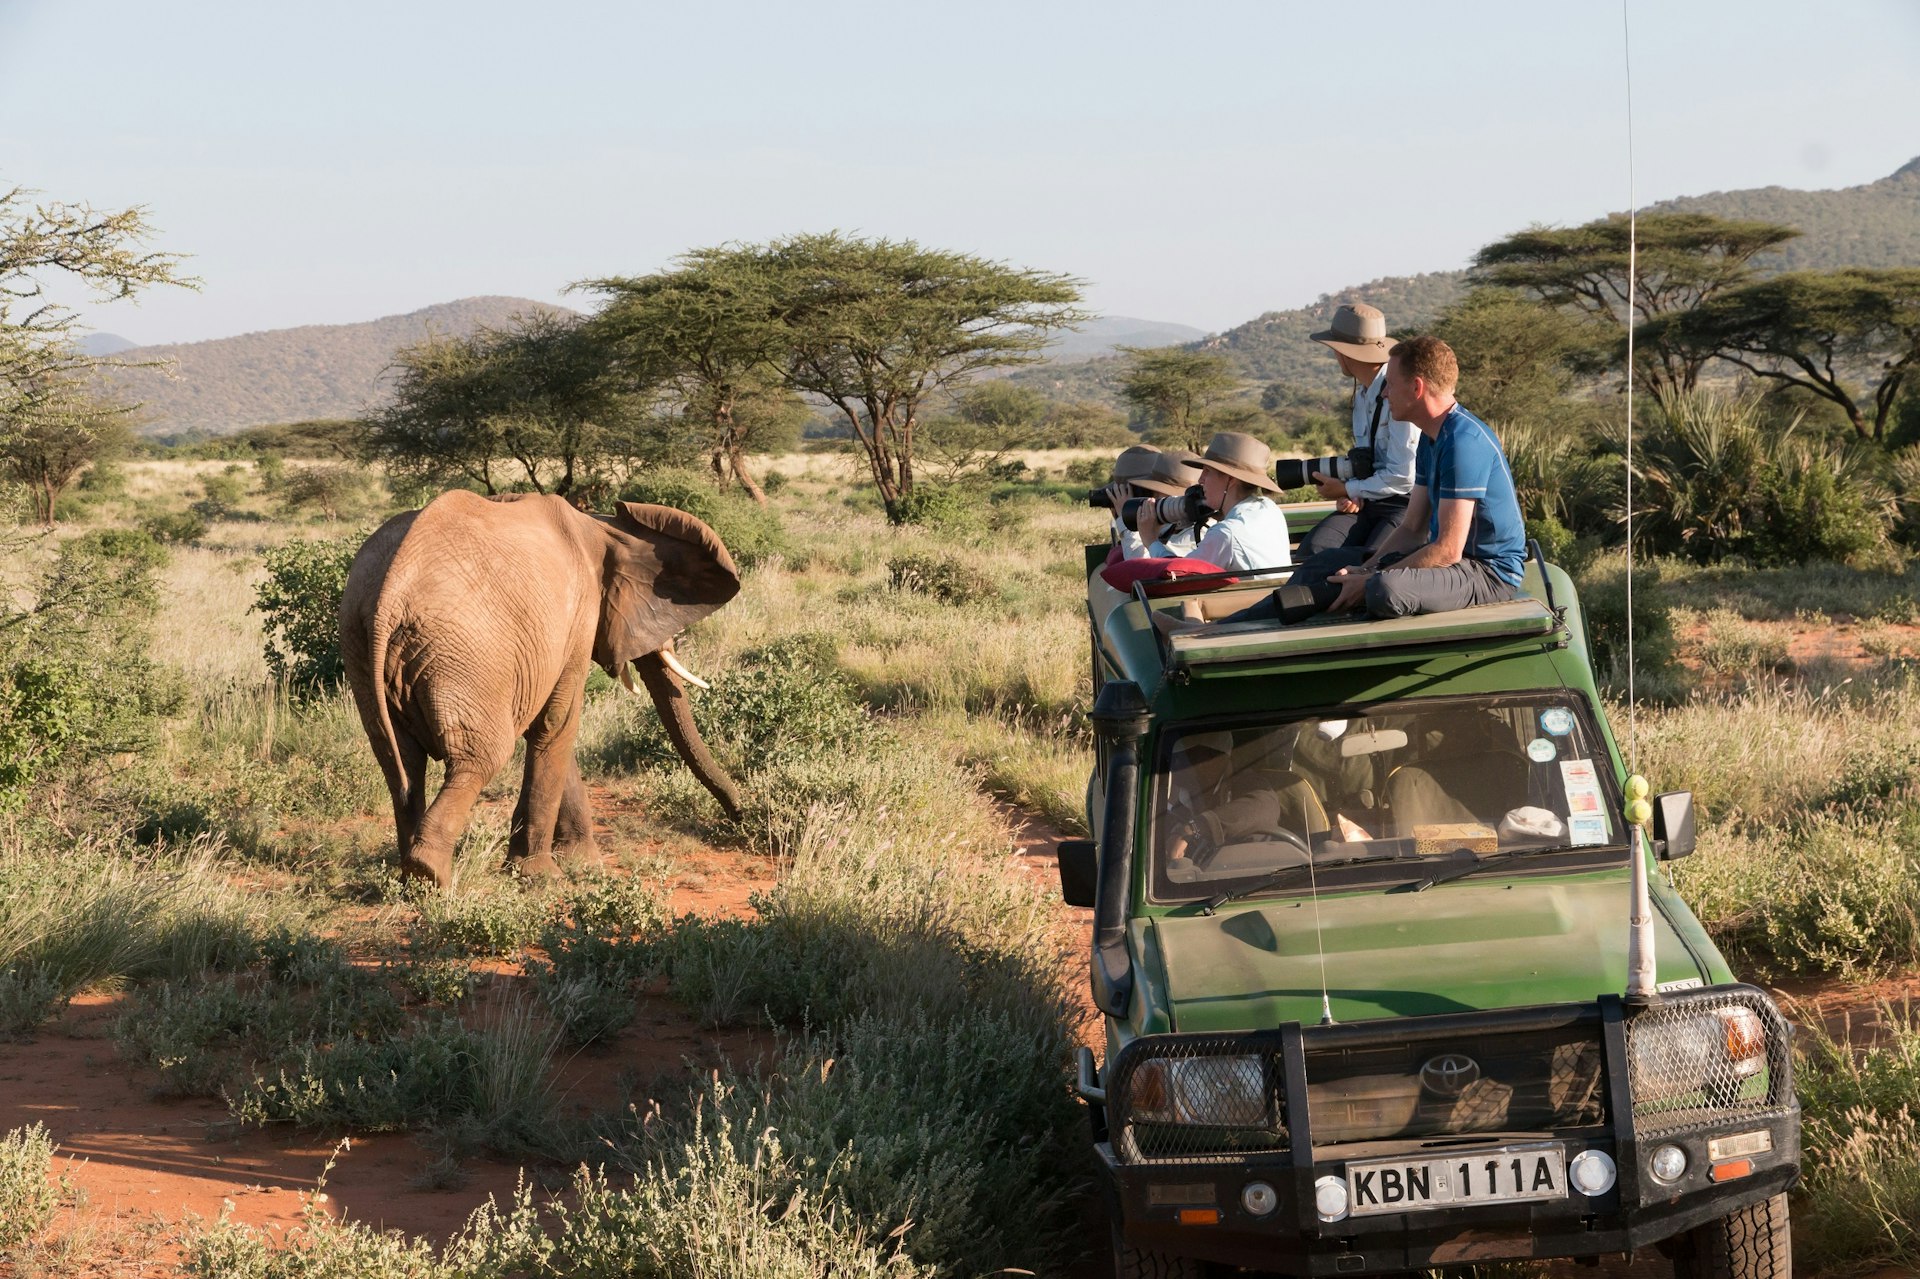 A green Toyota open-topped 4WD truck sits next to an elephant; four tourists are poking out of the open top, three of them holding large cameras. The scene is open grassland with acacia trees.